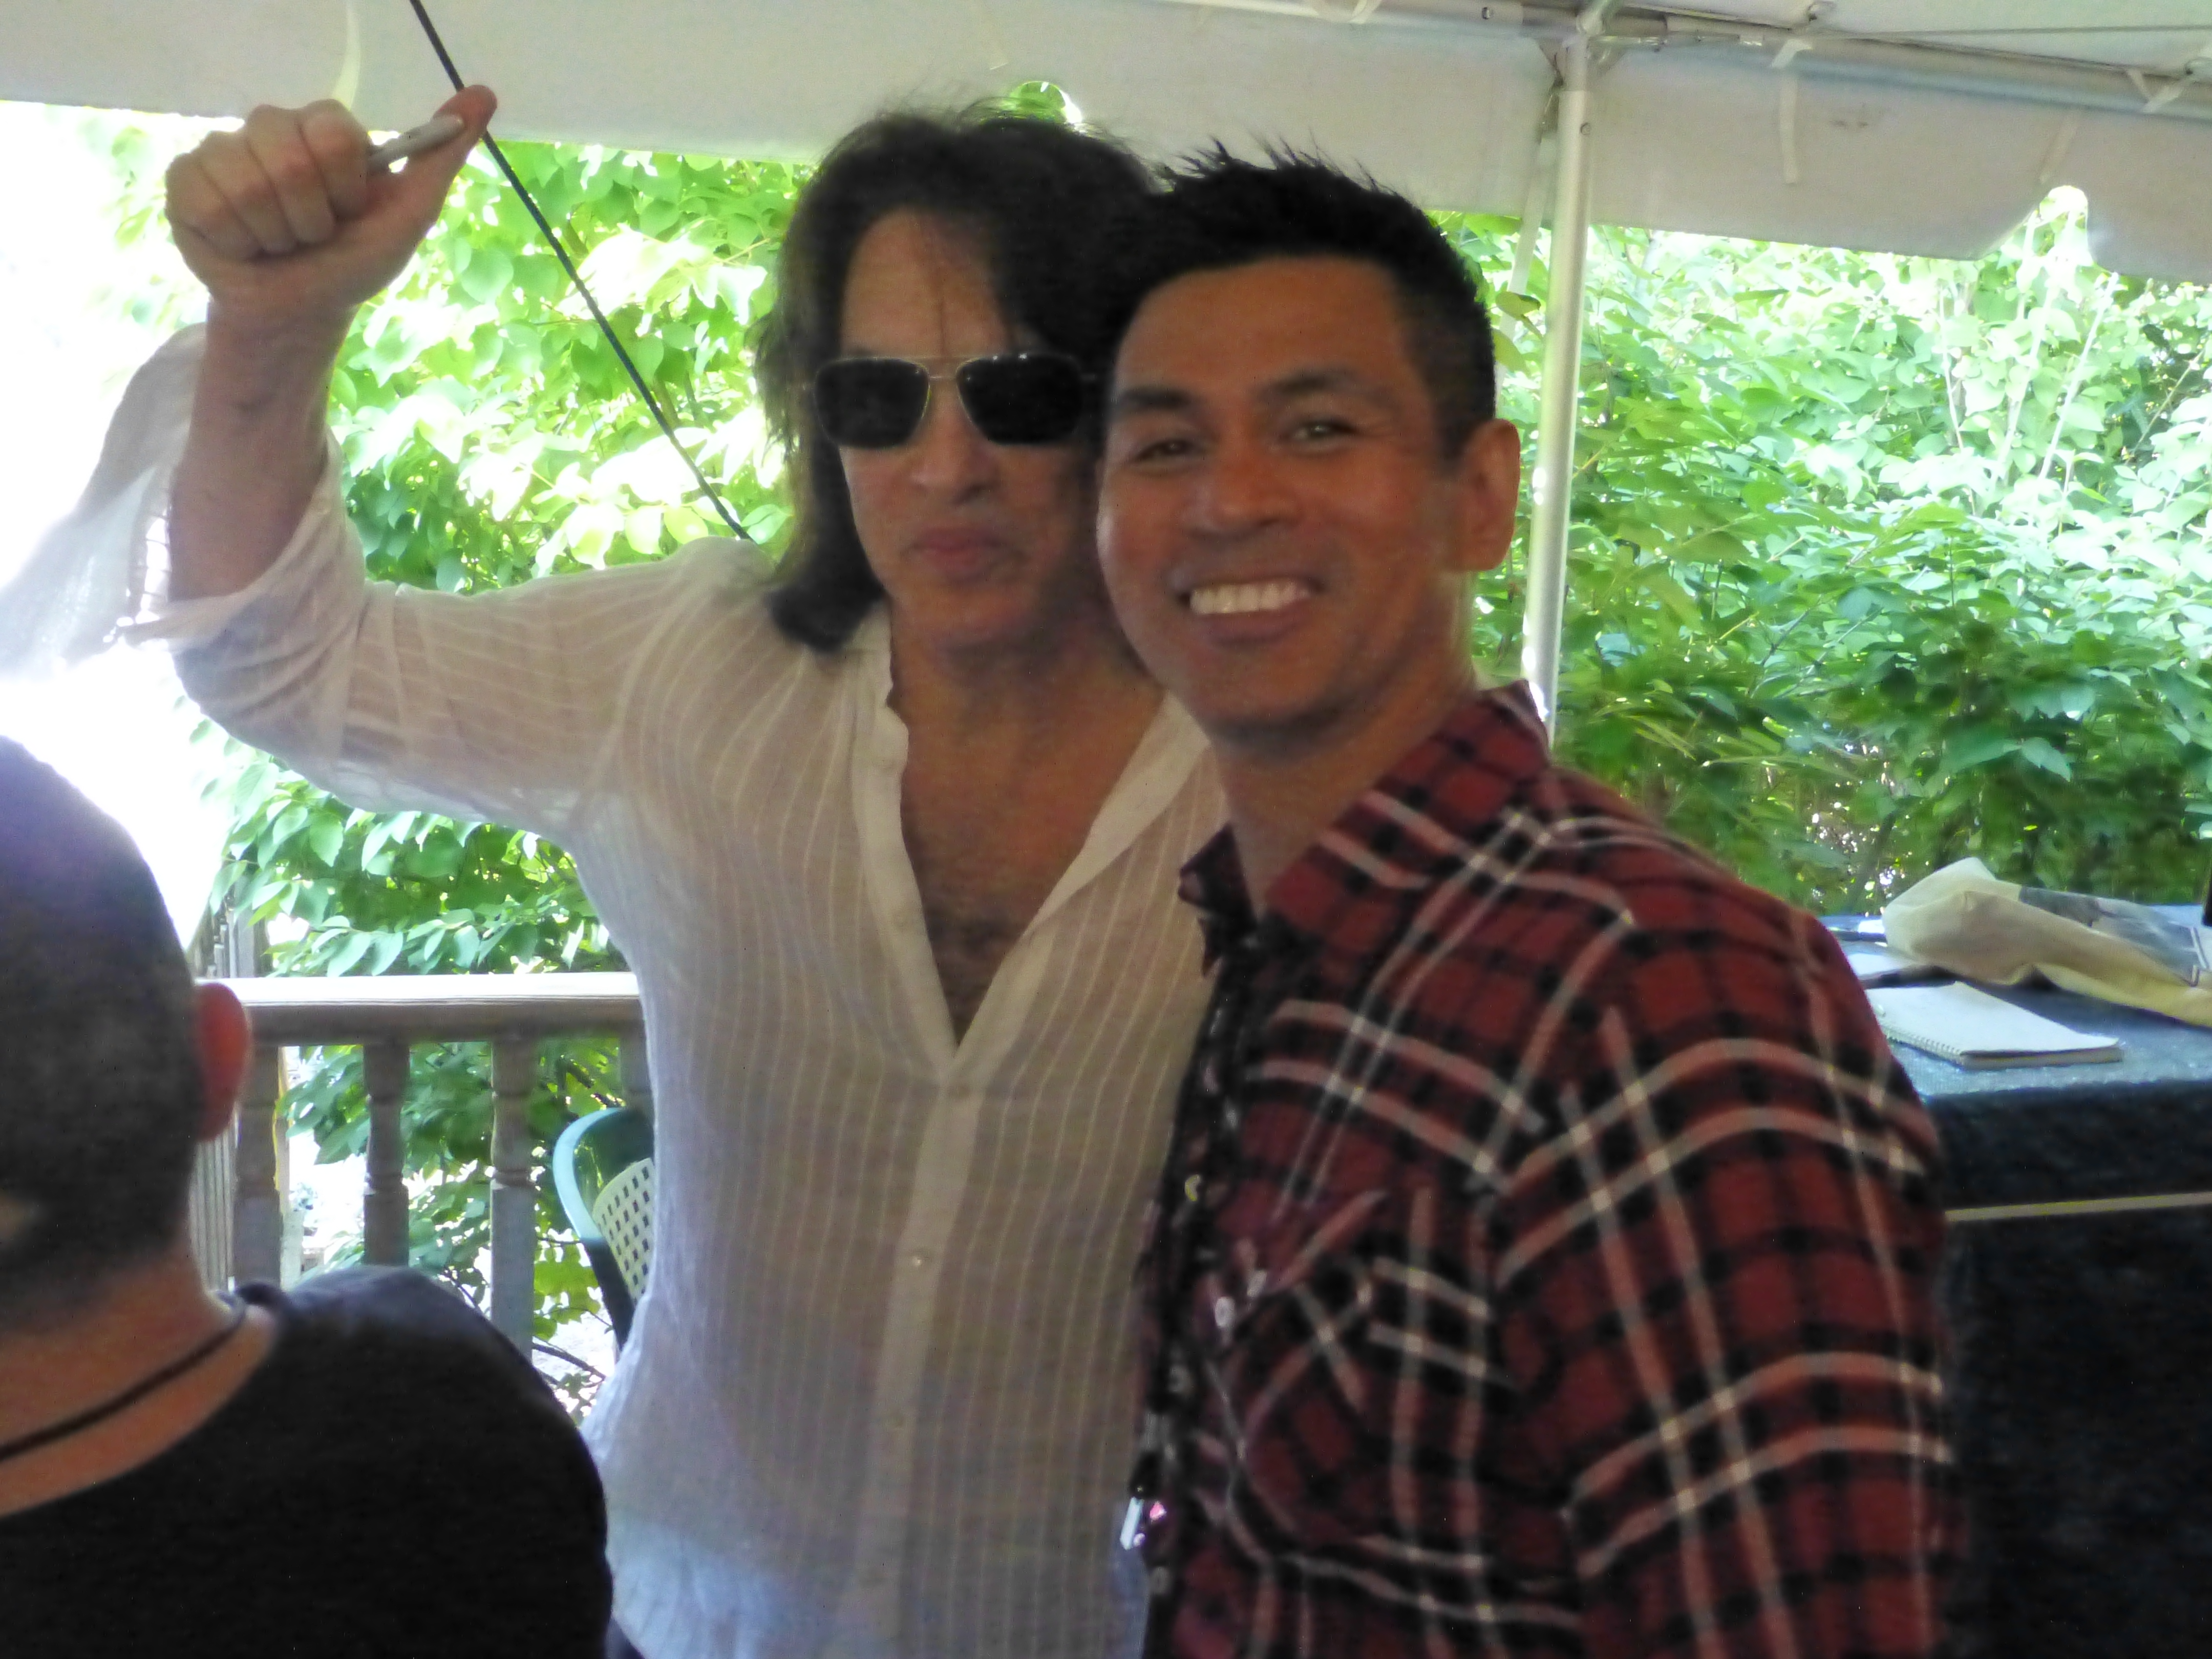 Paul Stanley of the legendary rock band KISS